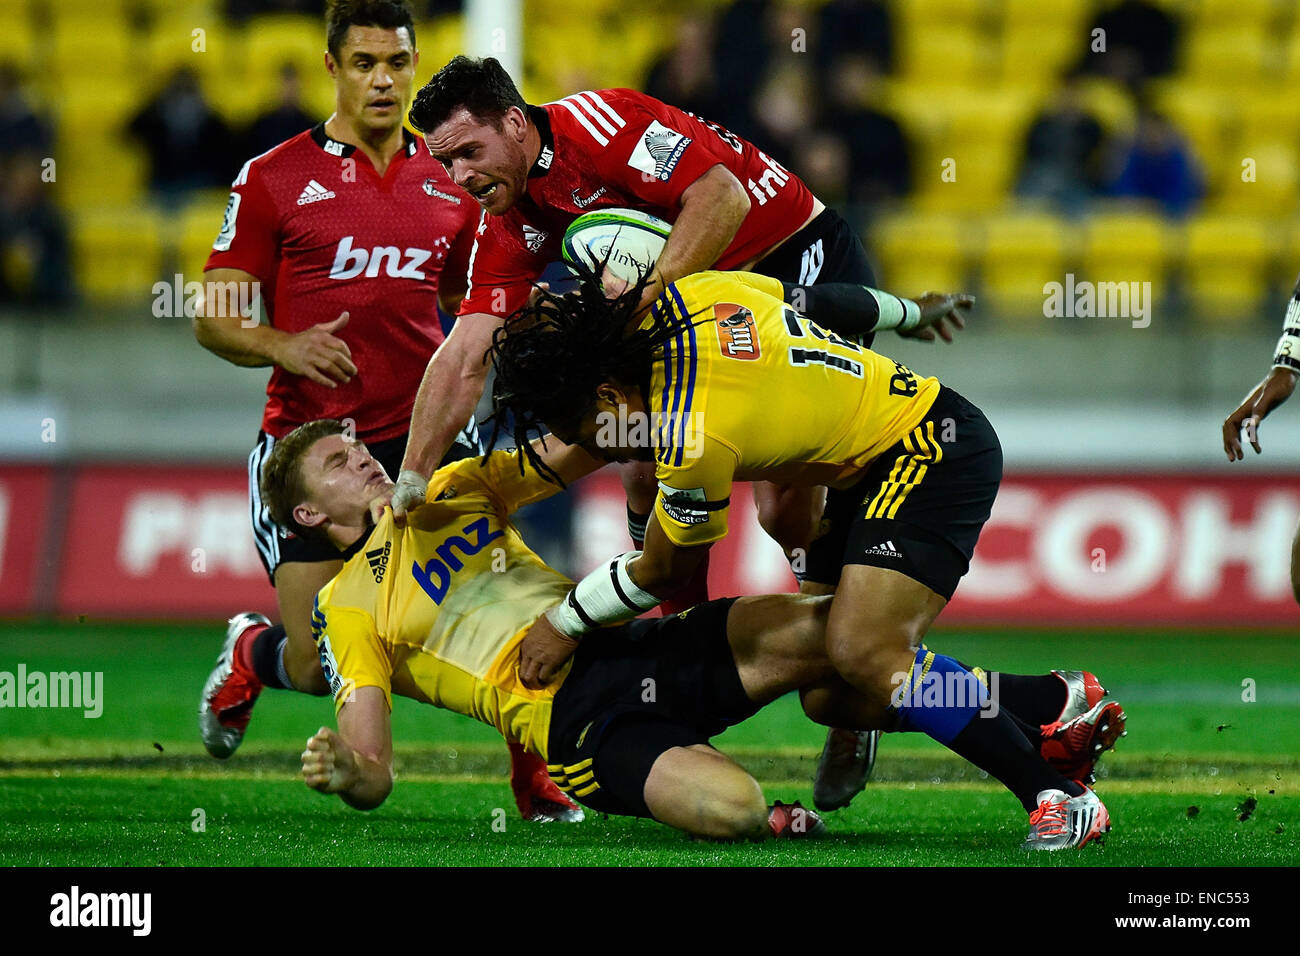 Wellington, New Zealand. 02nd May, 2015. Crusaders' Ryan Crotty (Top) is  tackled by Hurricanes' Ma'a Nonu (R and Beauden Barrett (L) during the  Super Rugby Hurricanes v Crusaders rugby match at the